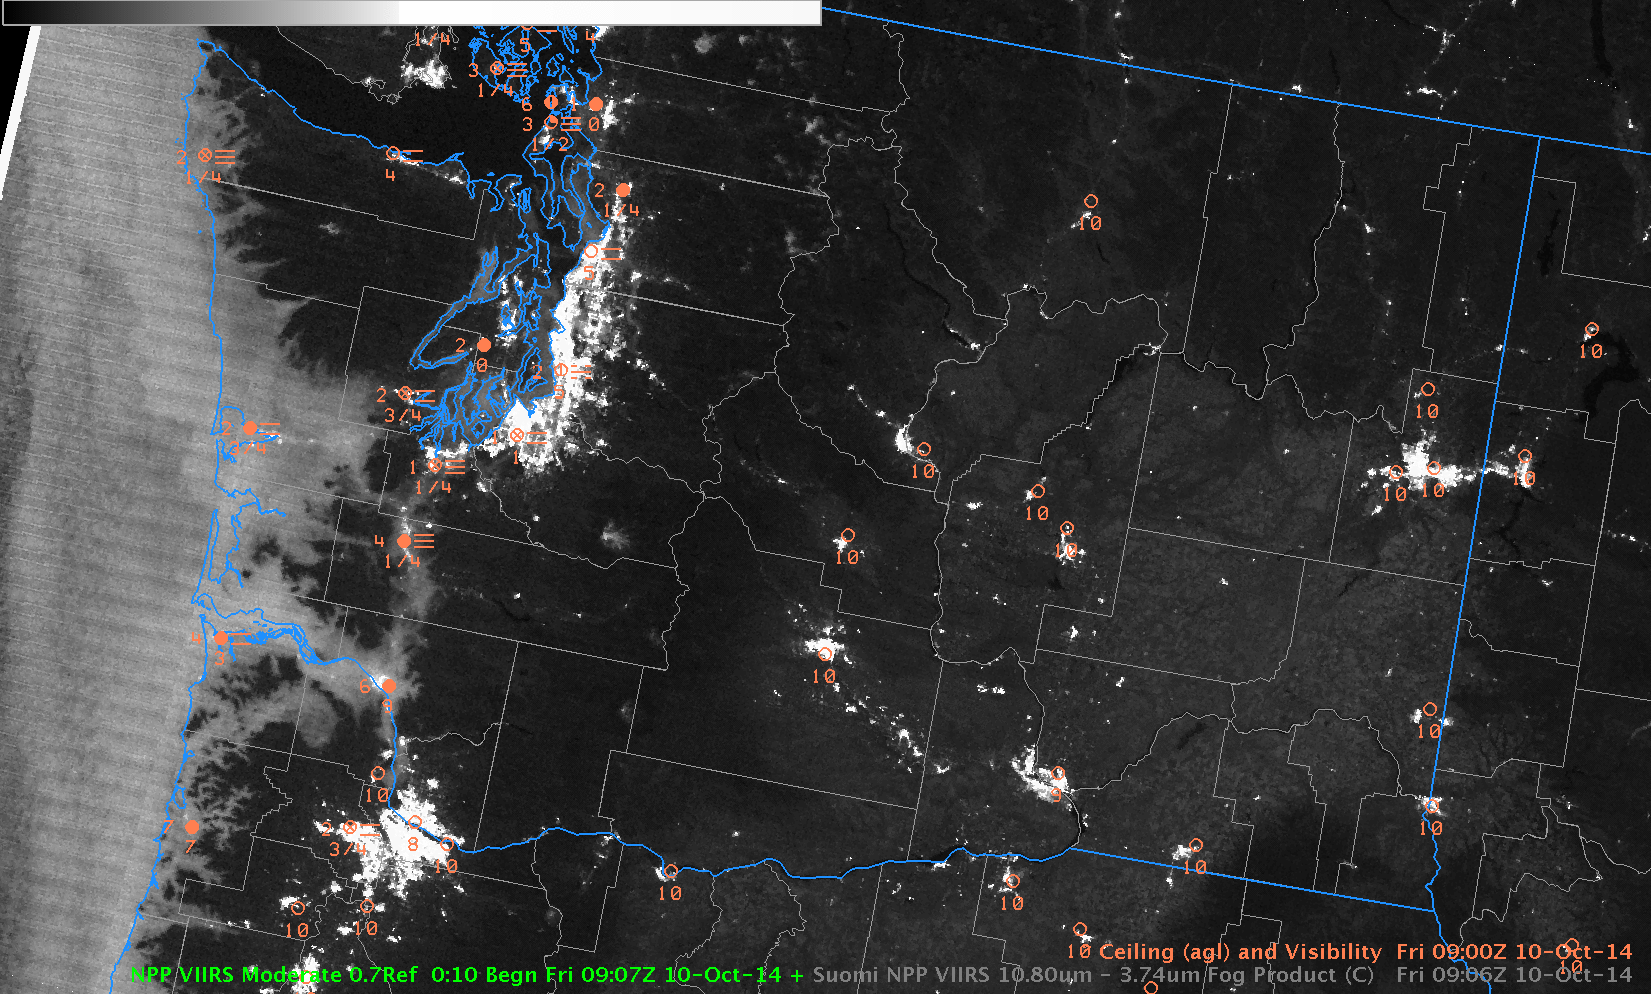 Suomi NPP 0.7 µm visible Day Night Band imagery at 0907 and 1048 UTC over Washington State with surface observations of ceilings and visibilities (click to enlarge)